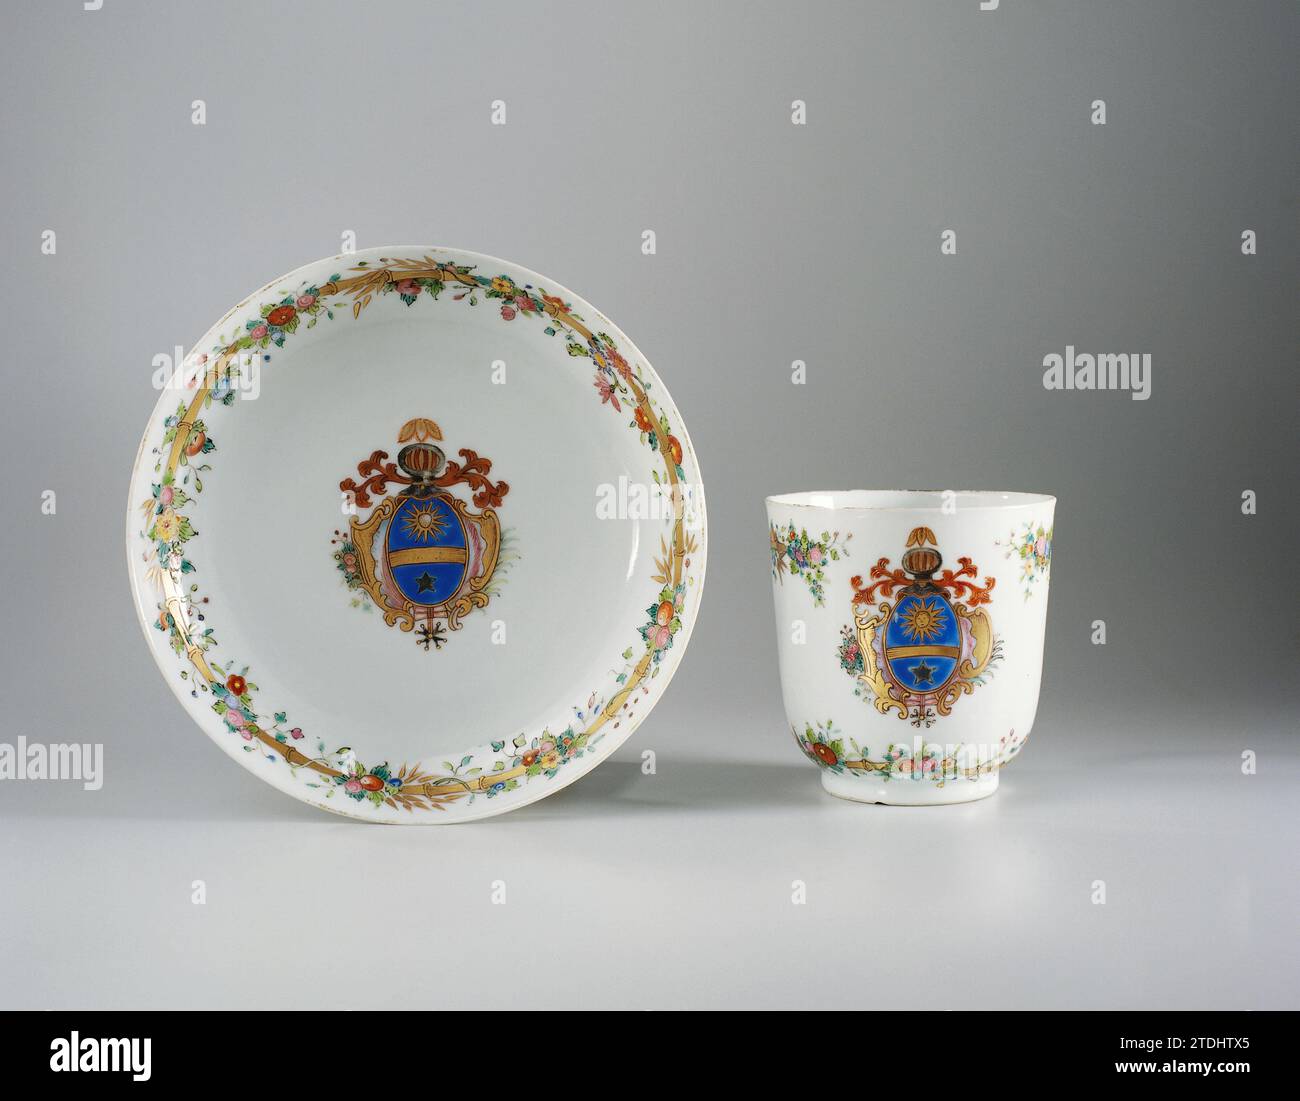 Saucer with a coat of arms and bamboo border with floral scrolls, anonymous, c. 1750 - c. 1774 Porcelain dish, painted on the glaze in blue, red, pink, green, yellow, black and gold. On the flat of the dish an unidentified family crest with a sun with a face, a star and a gold beam on a blue background. The weapon is surrounded by leaf vines, a palm branch and flower branch. On the wall a bamboo band with flower vines. Weapon porcelain with email colors. China porcelain. glaze. gold (metal) painting / gilding / vitrification Porcelain dish, painted on the glaze in blue, red, pink, green, yello Stock Photo